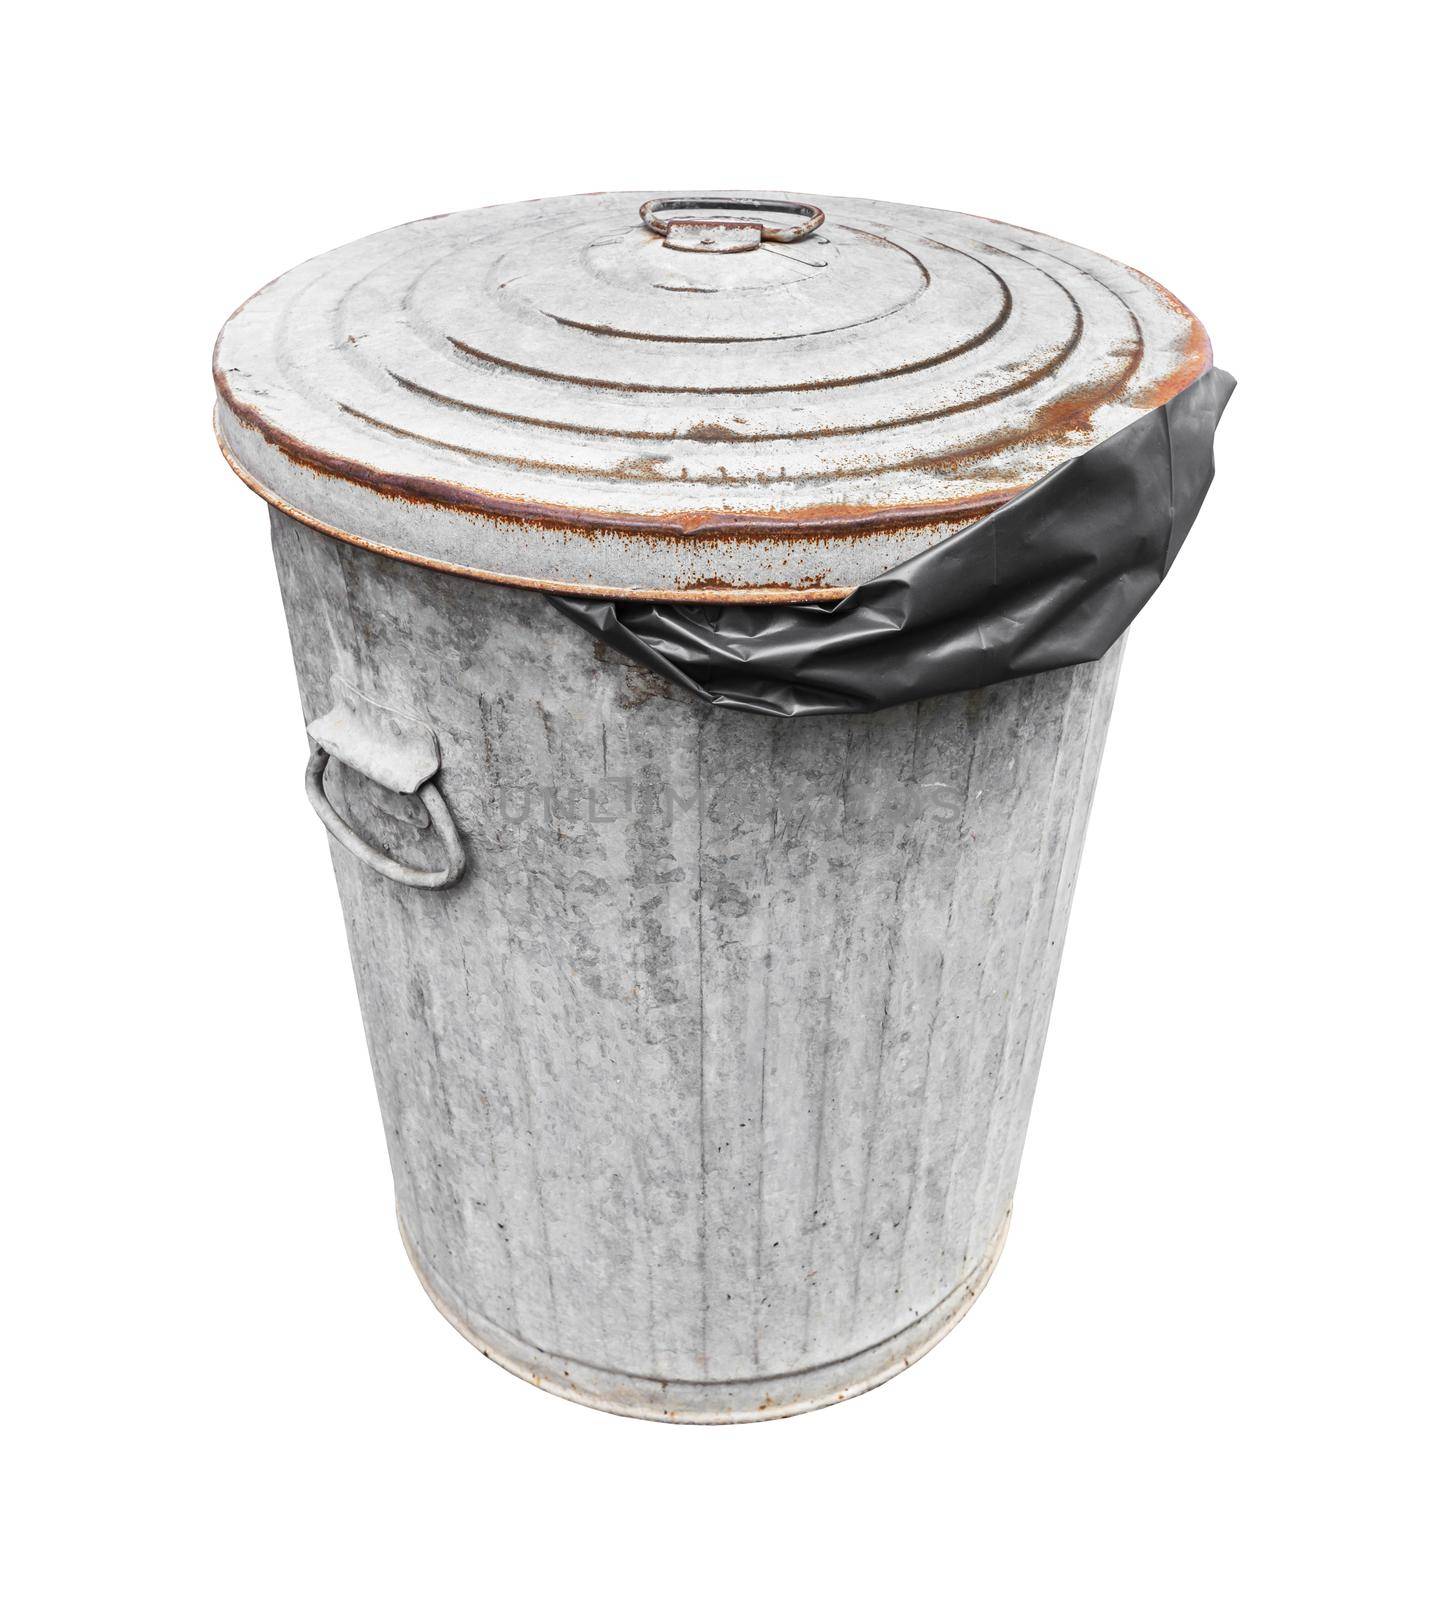 Rusty old trash with black plastic bag can isolated on white with a clipping path. by Gamjai